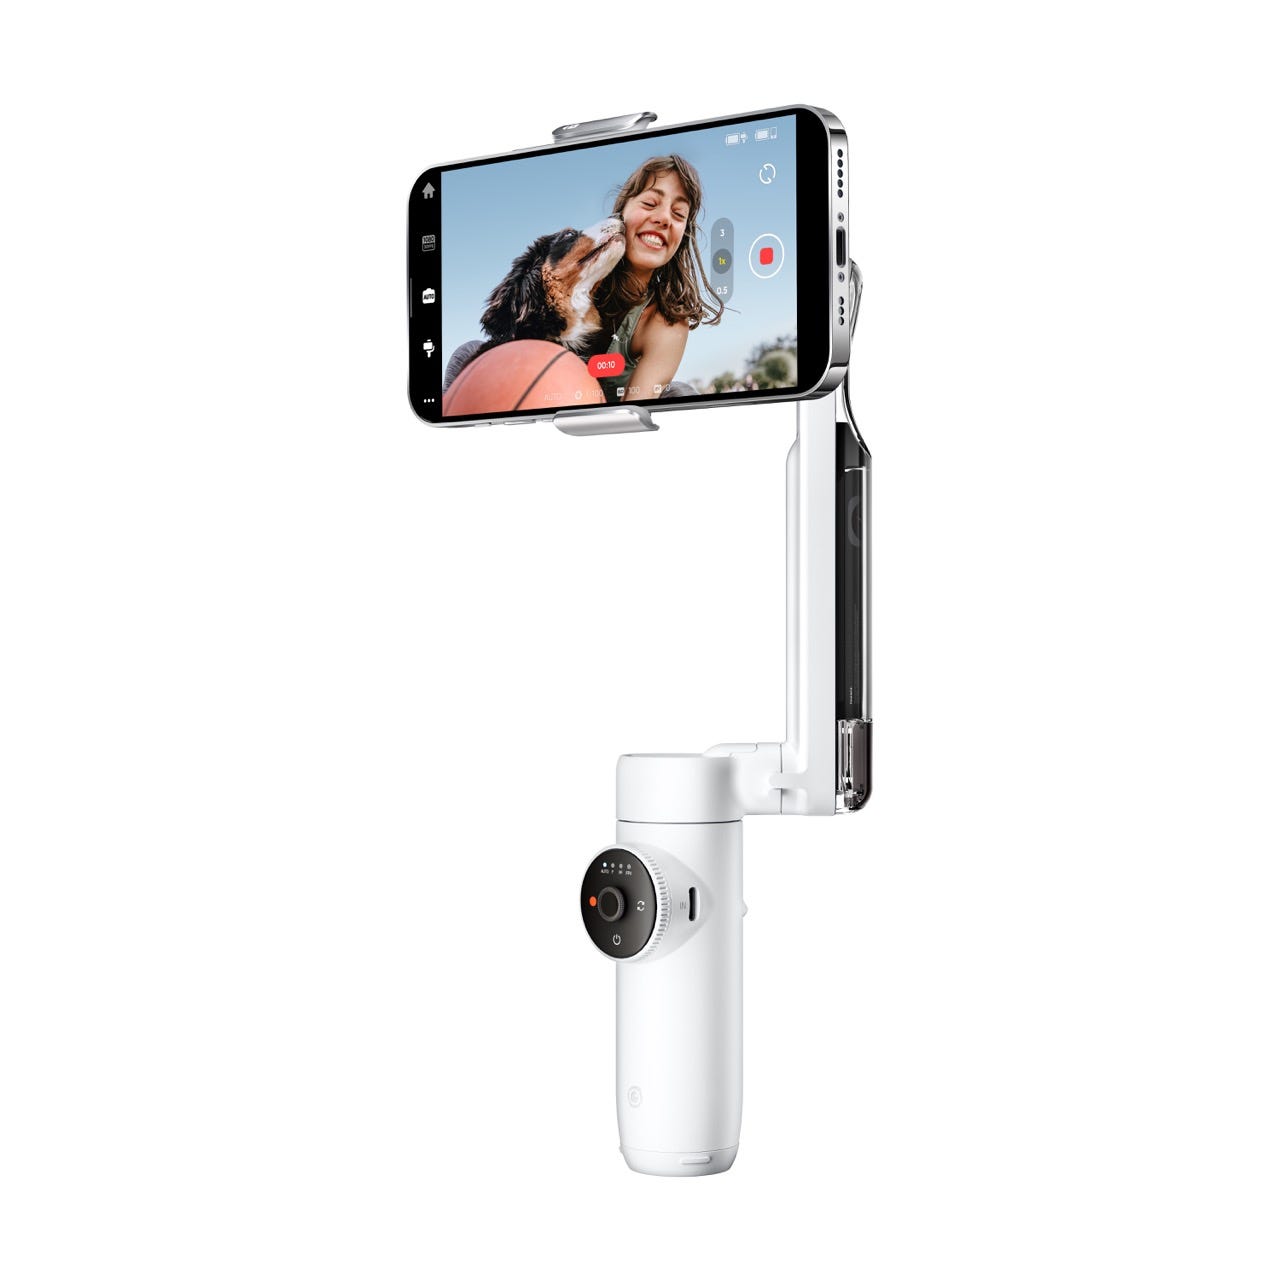 Product image of the Insta360 Flow, a gimbal with a hand grip, stabilizing arm, and a smartphone attached.